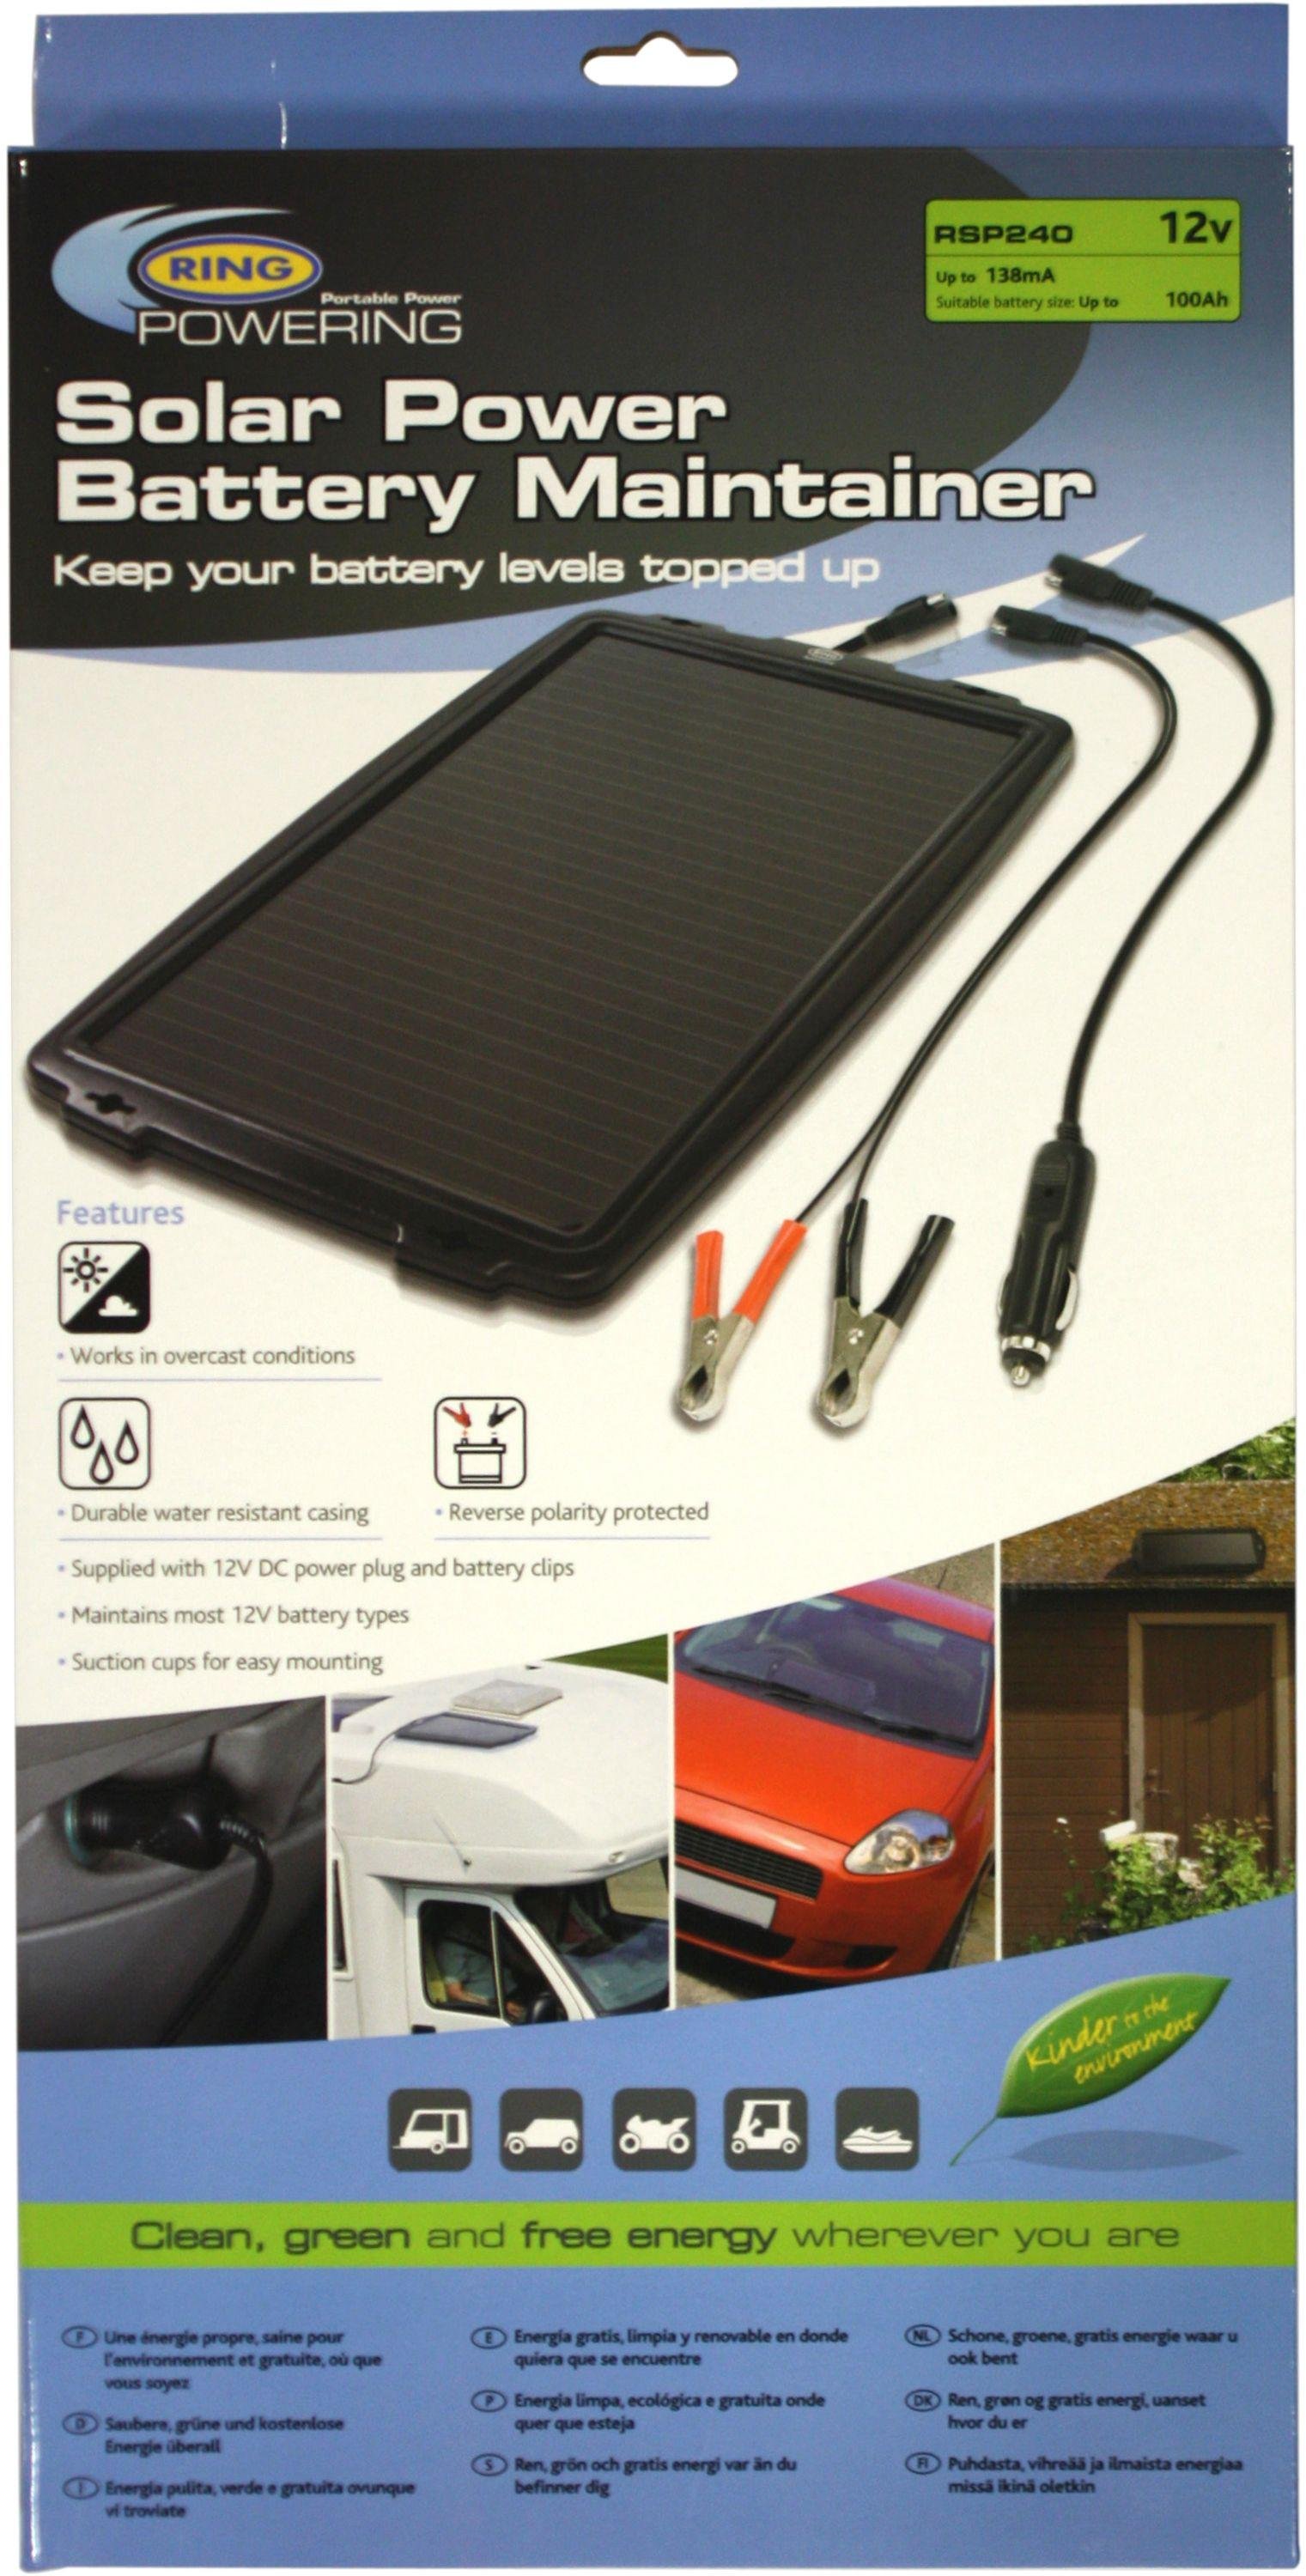 Ring 2.4W Solar Battery Maintainer